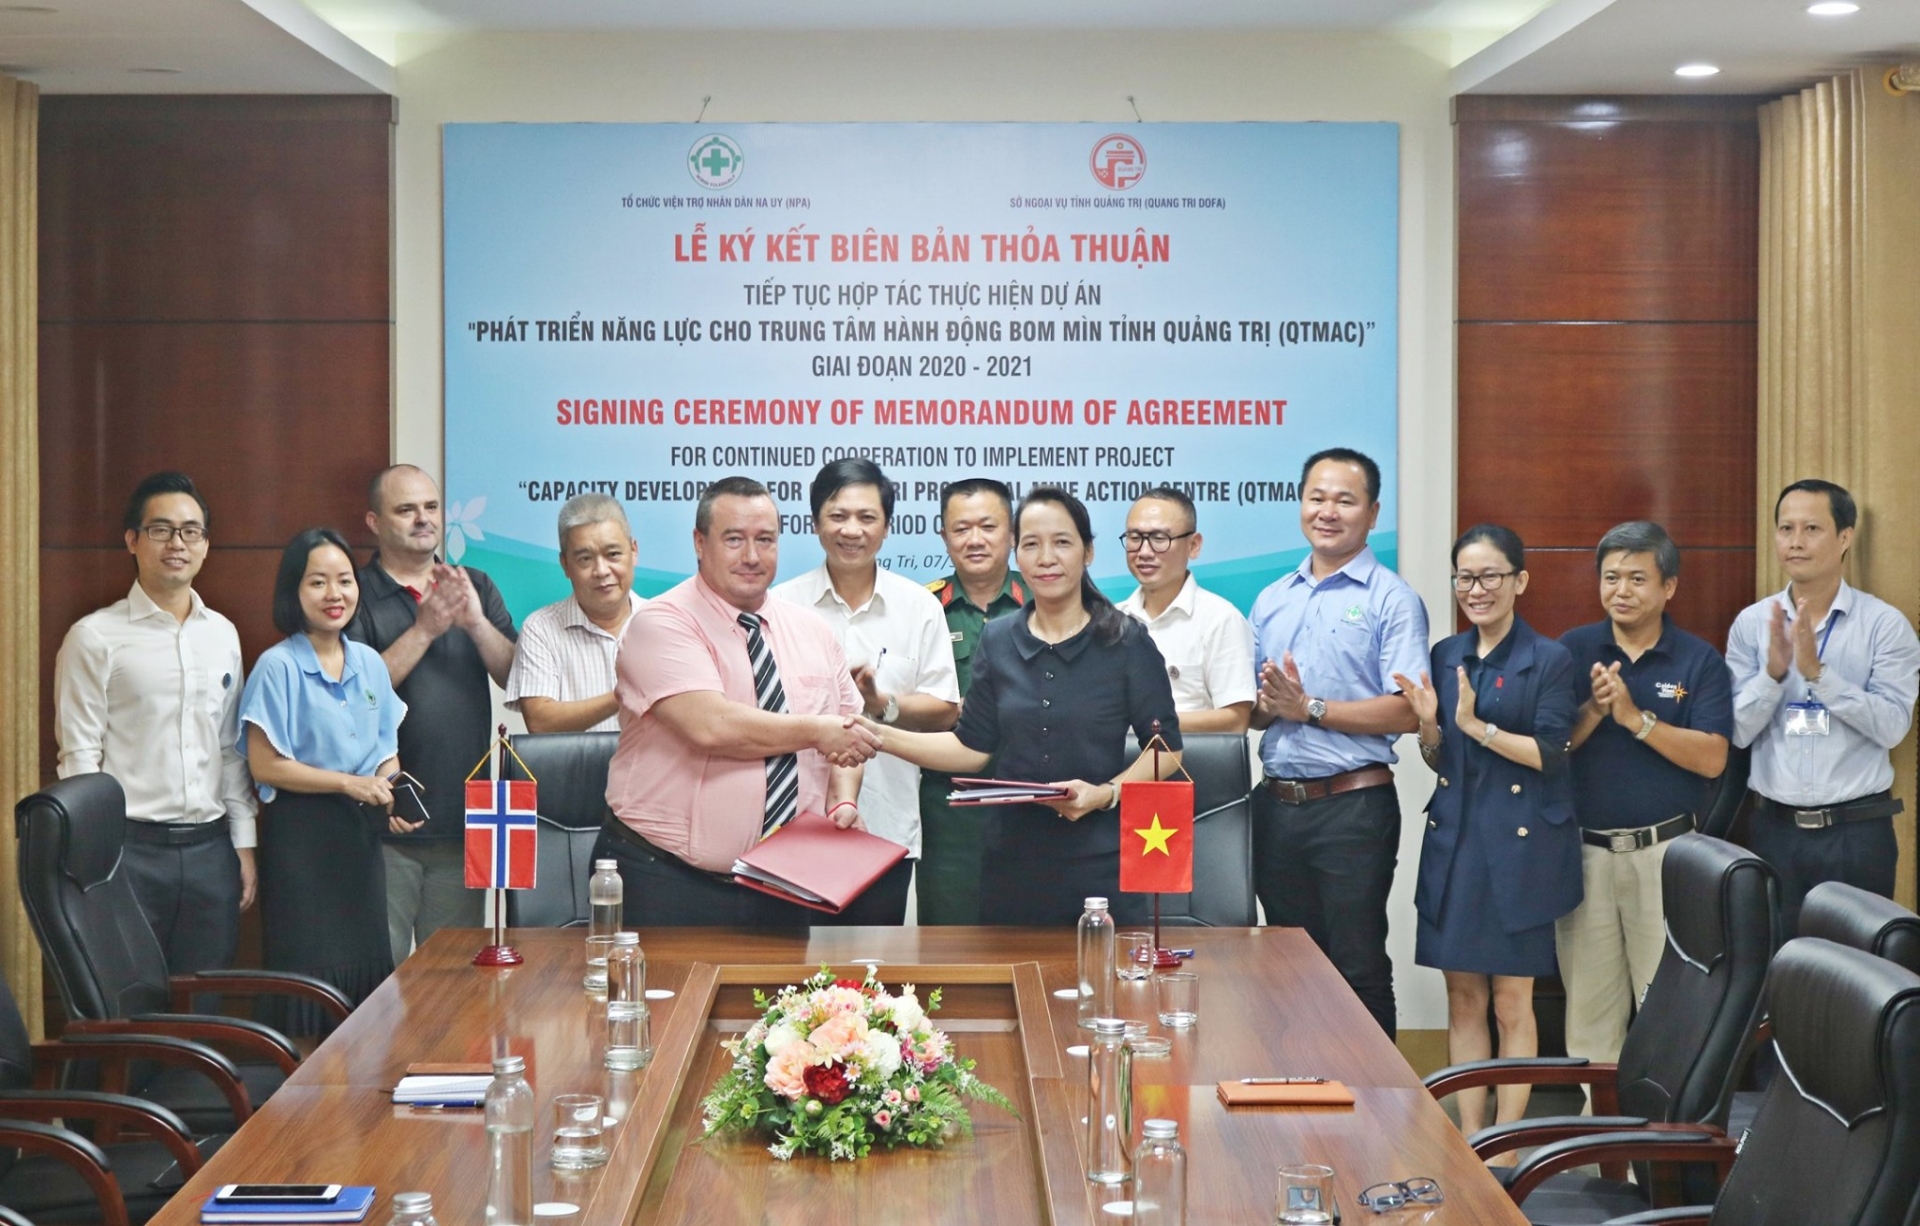 NPA continues support to UXO clearance and capacity development in Quang Tri